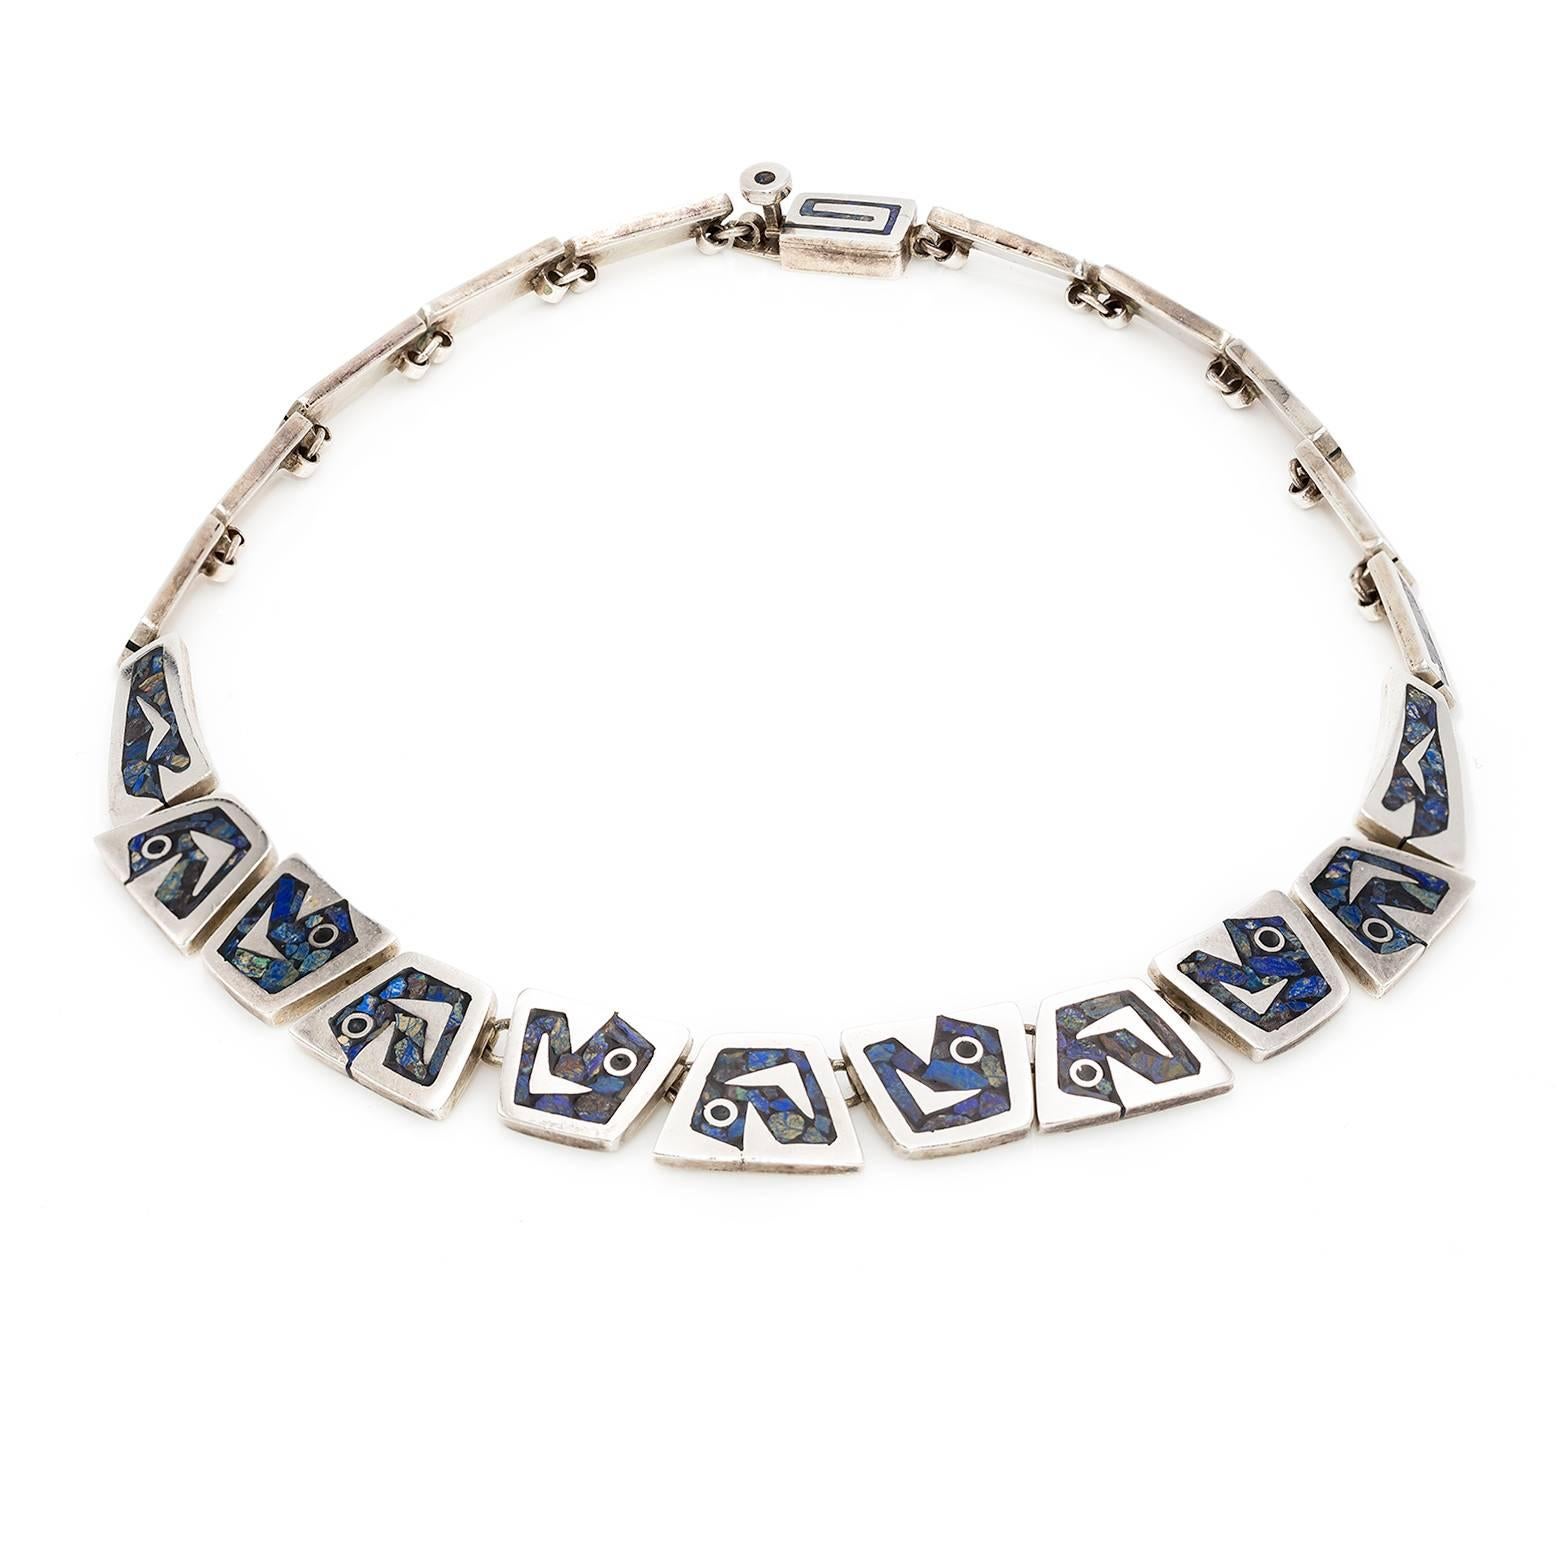 Handmade, detailed, carved, and inlaid link necklace with varying stones of lapis and chrysicola. This incredible necklace is made of Mexican sterling silver and stamped with the designer's emblem. Inquire about our matching bracelet